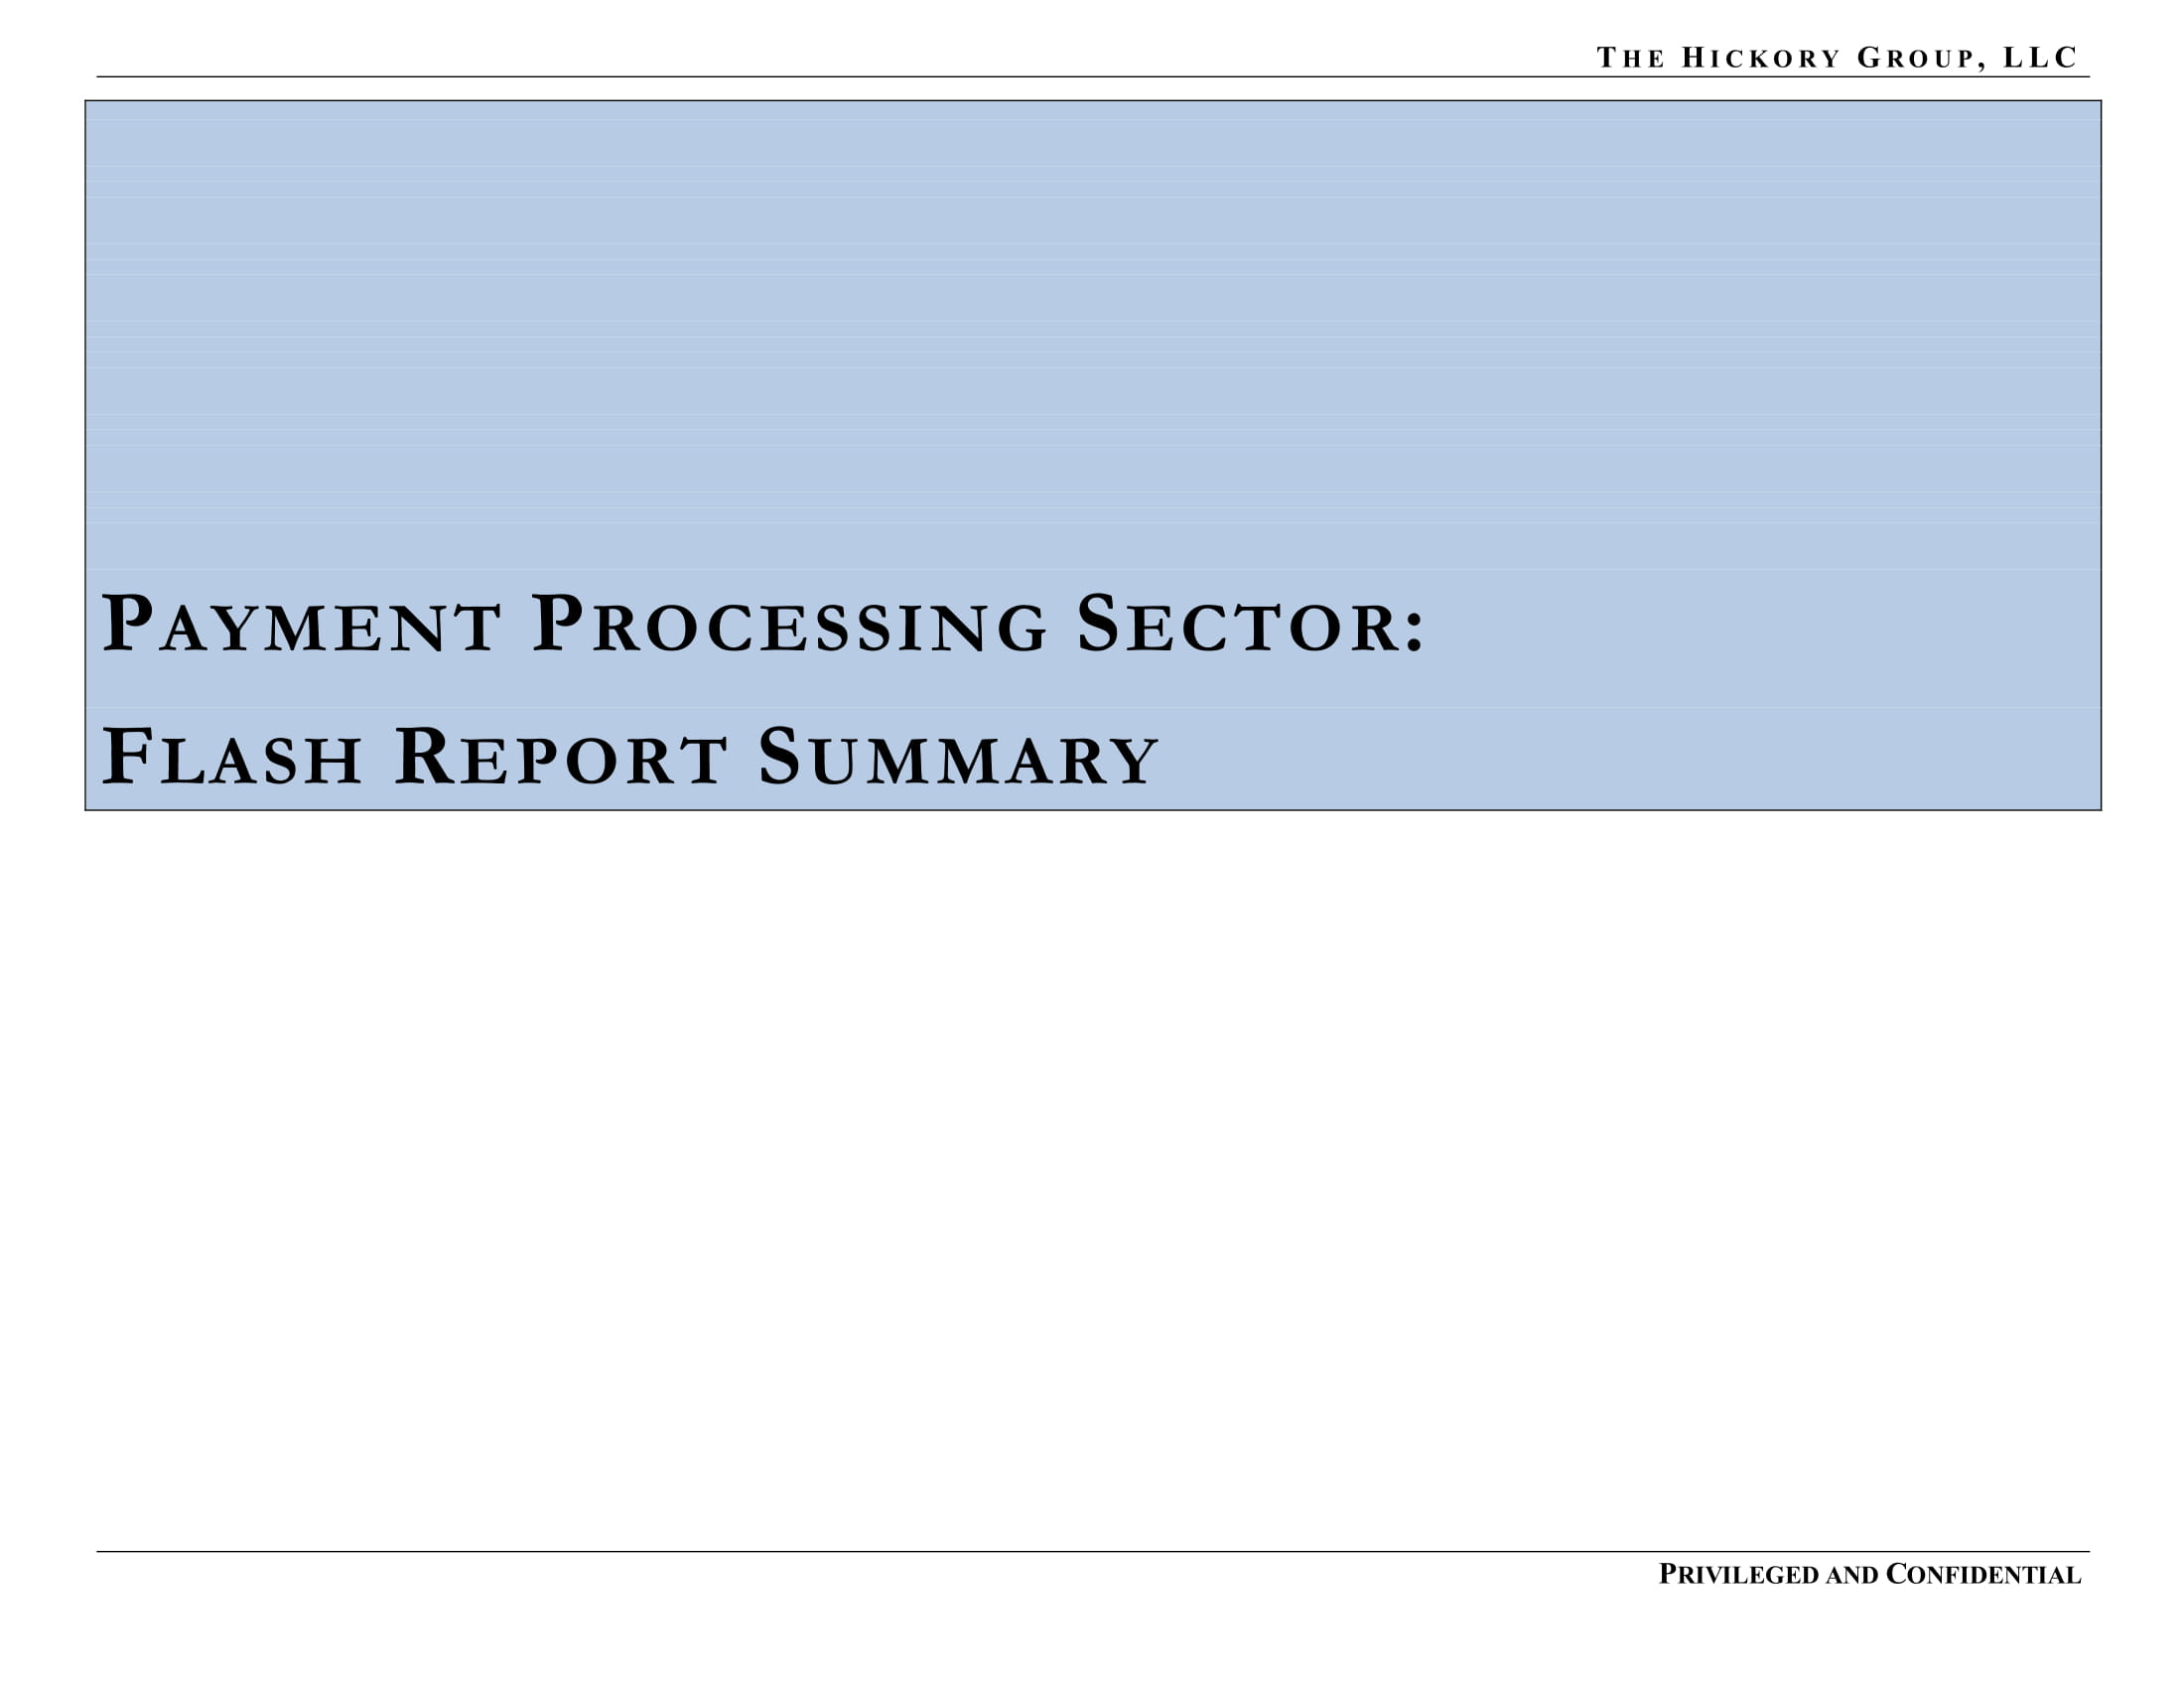 FINAL_THG FinTech Industry - Payment Processing Sector Flash Report (27 March 2019) Privileged & Confidential-25.jpg